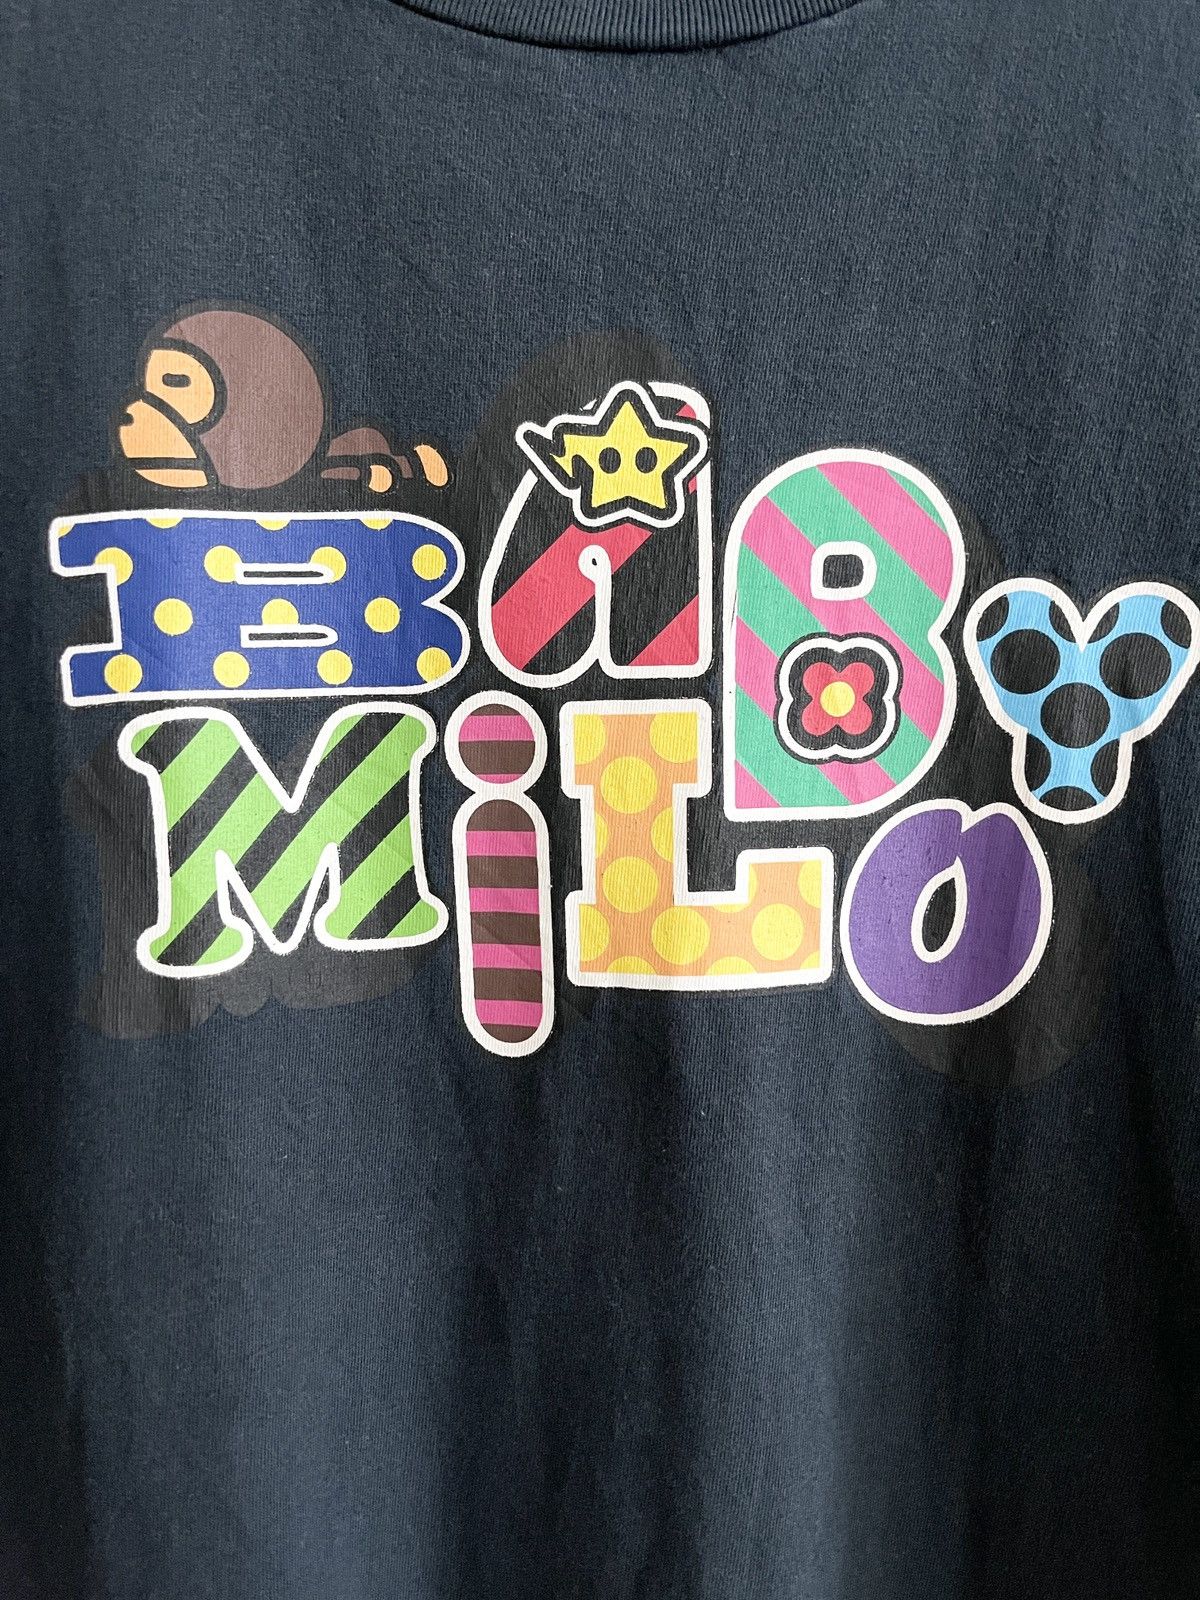 Bape Baby Milo Magical Spell-out Tee (M) - 4